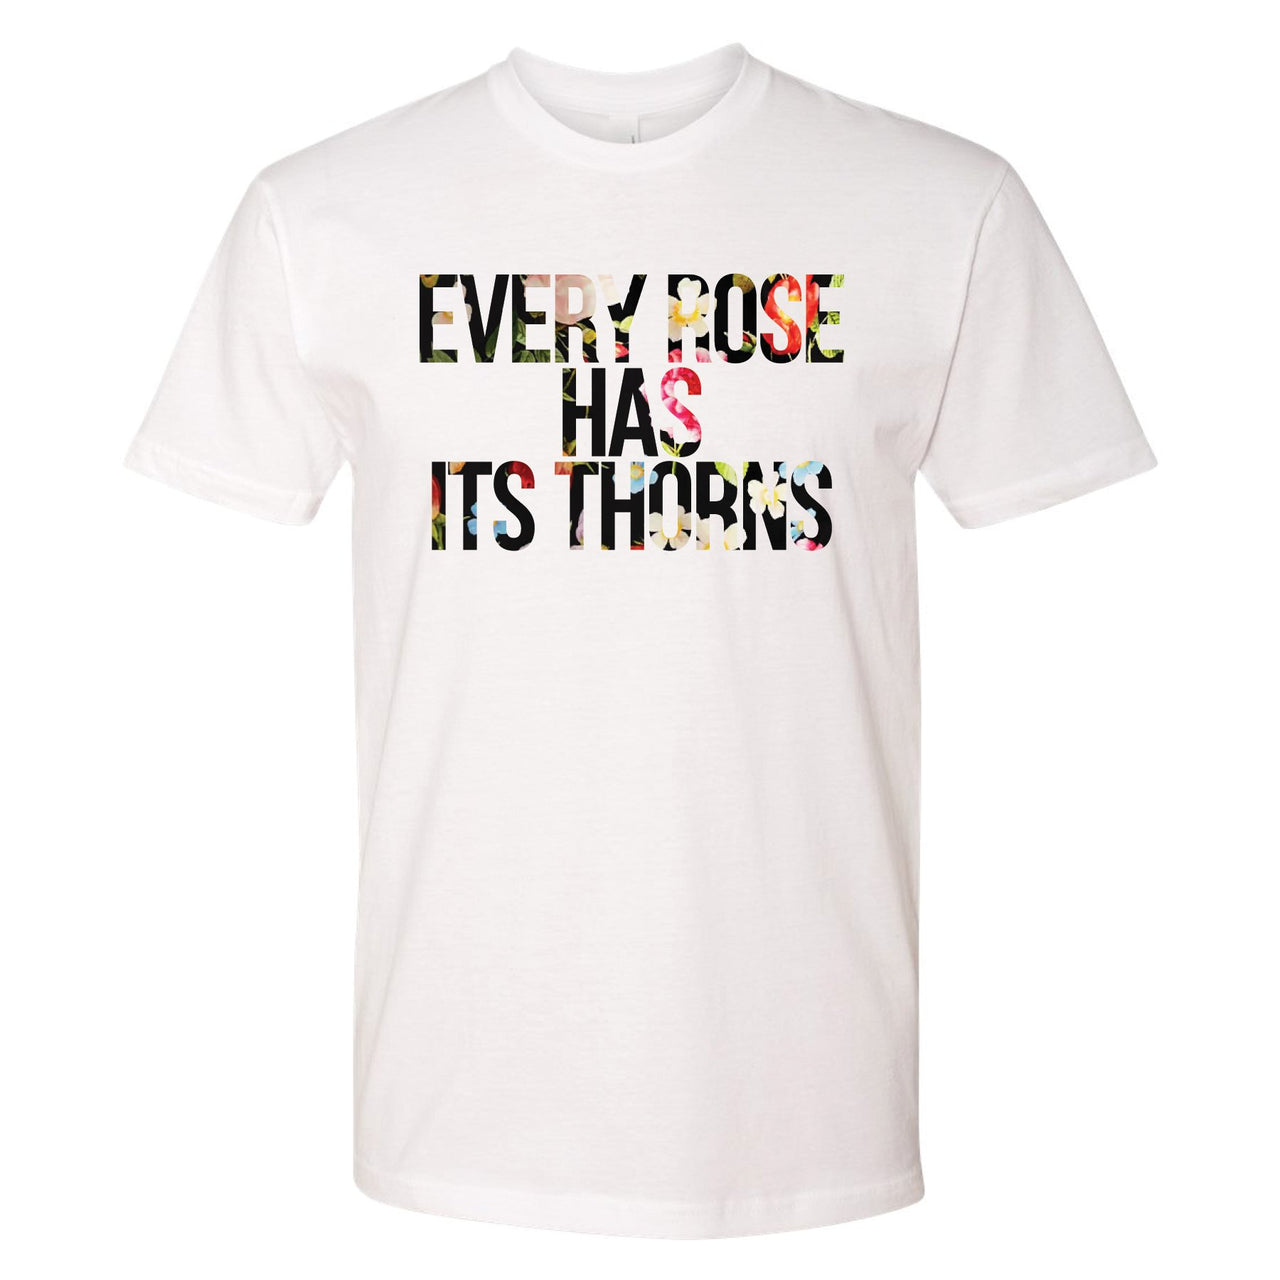 Floral One Foams T Shirt | Every Rose Has Its Thorns, White